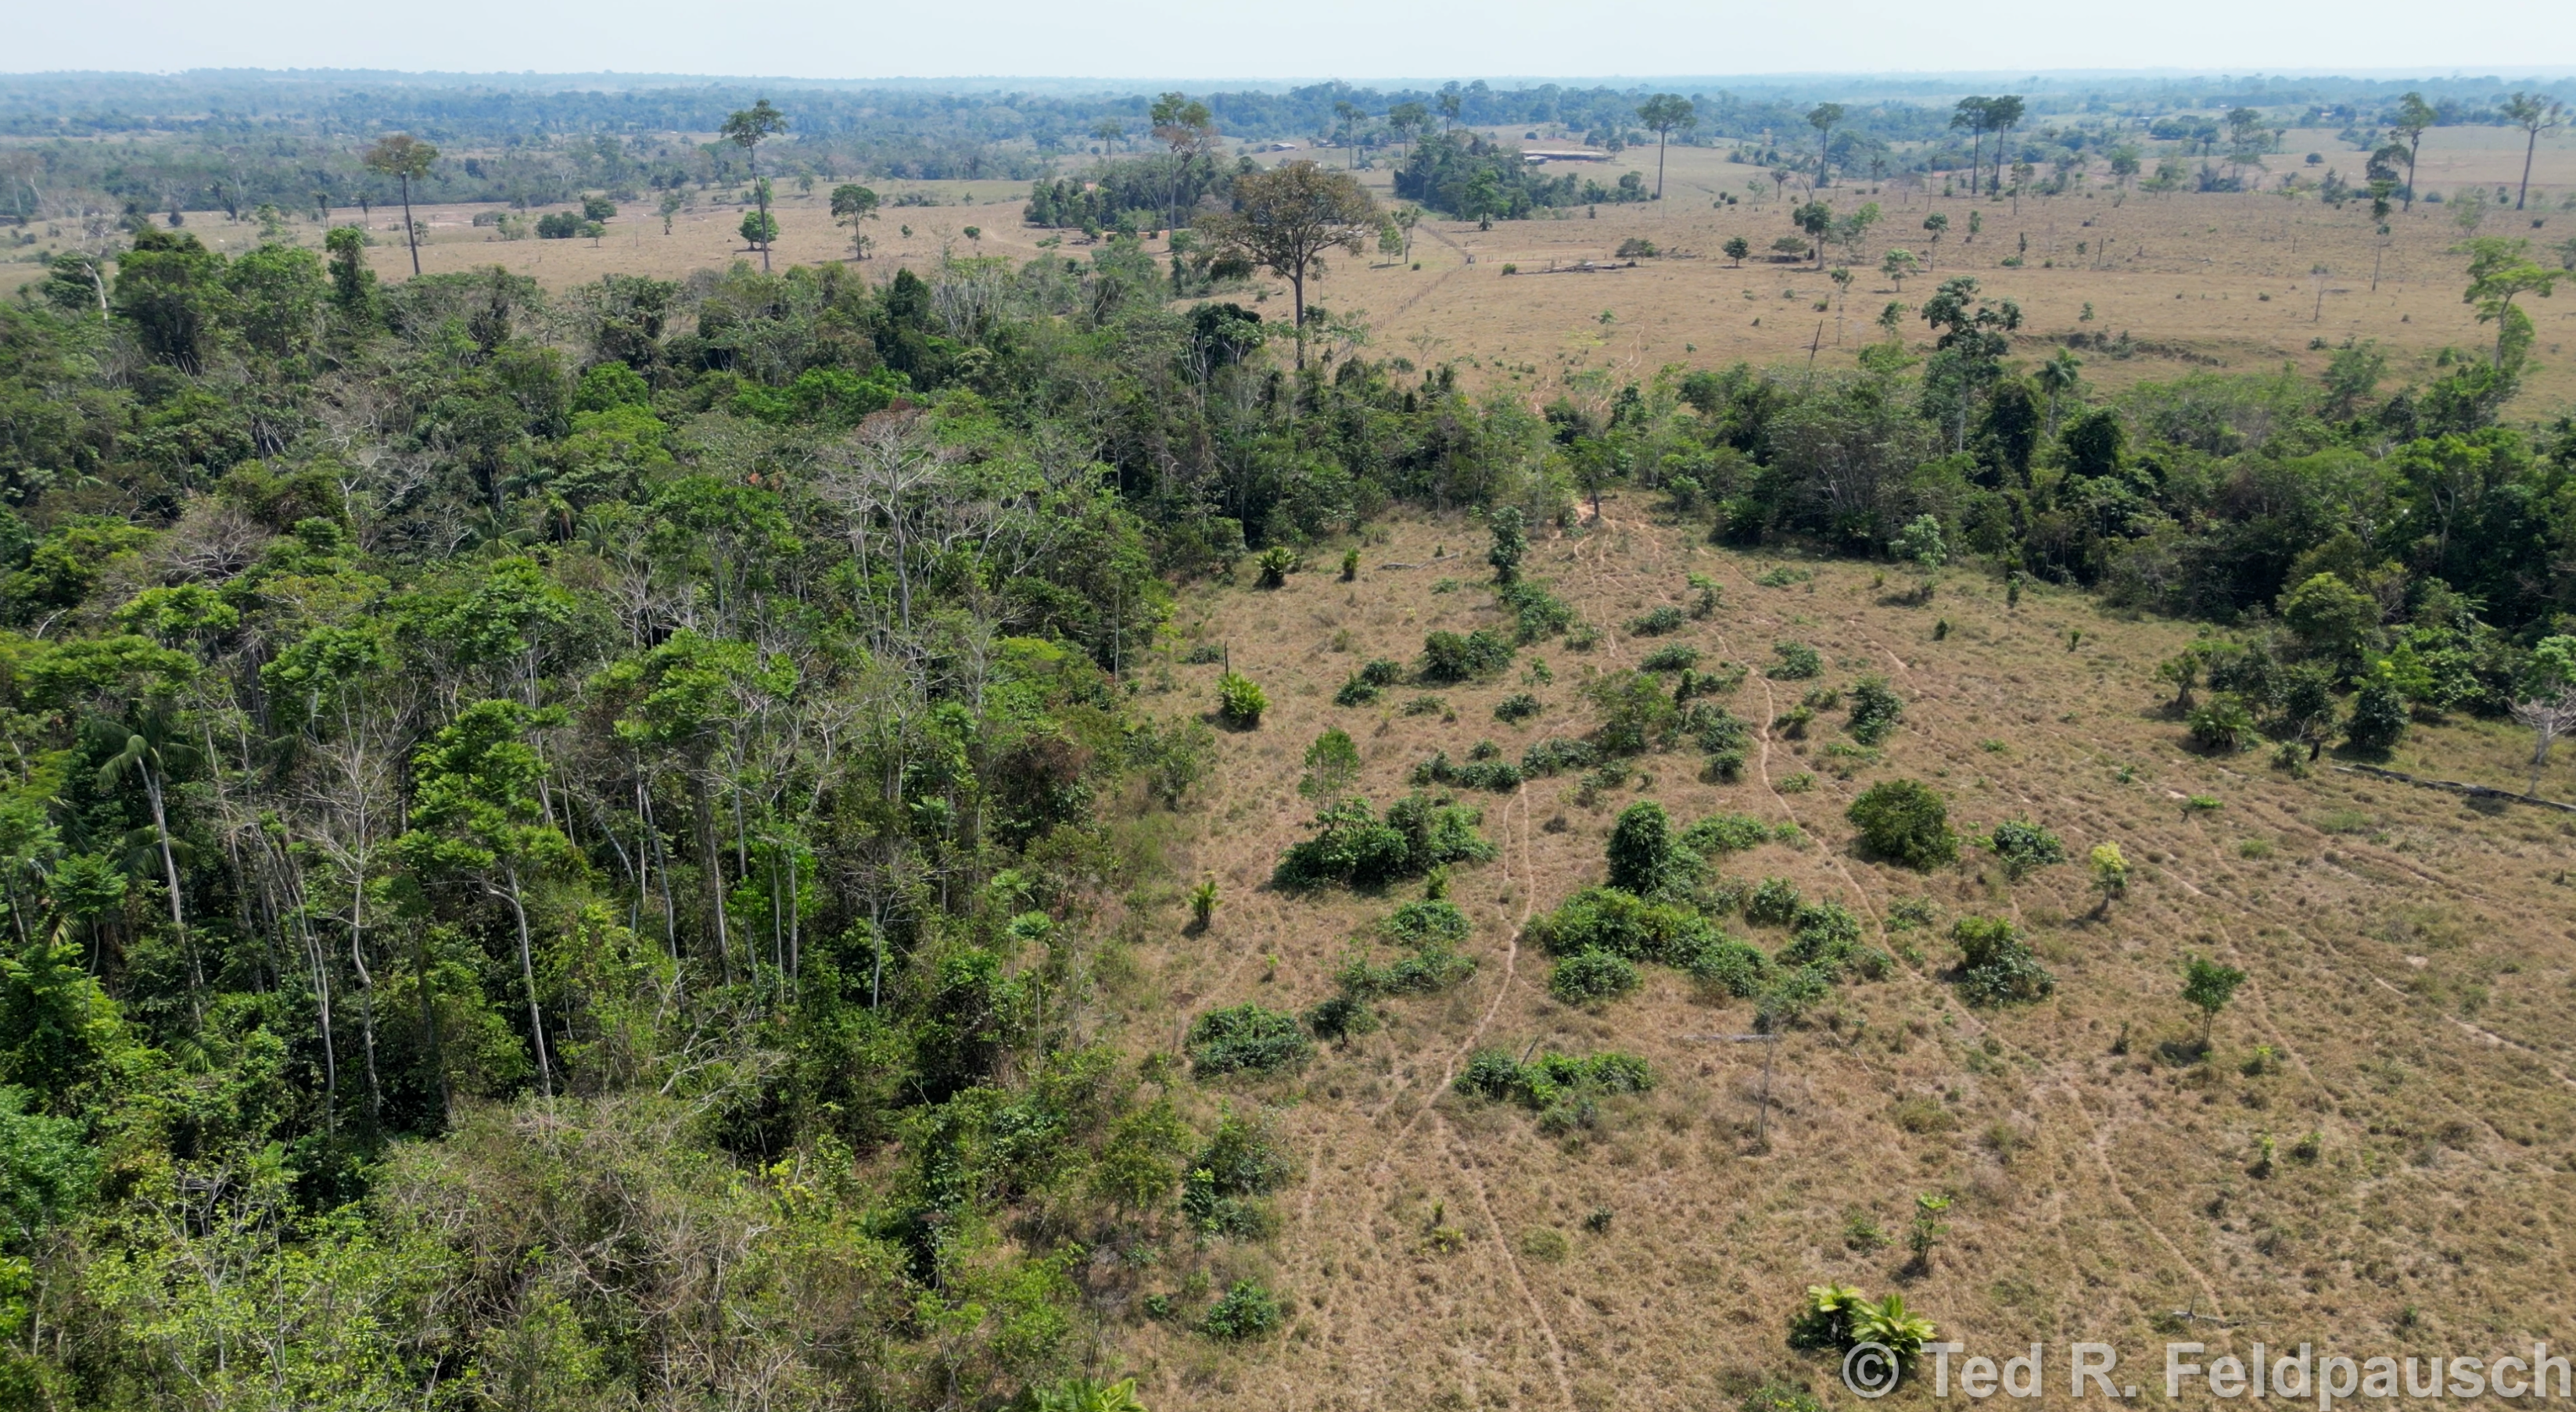 Degraded and burned forest in Acre Amazonia (image credit: Ted R. Feldpausch)